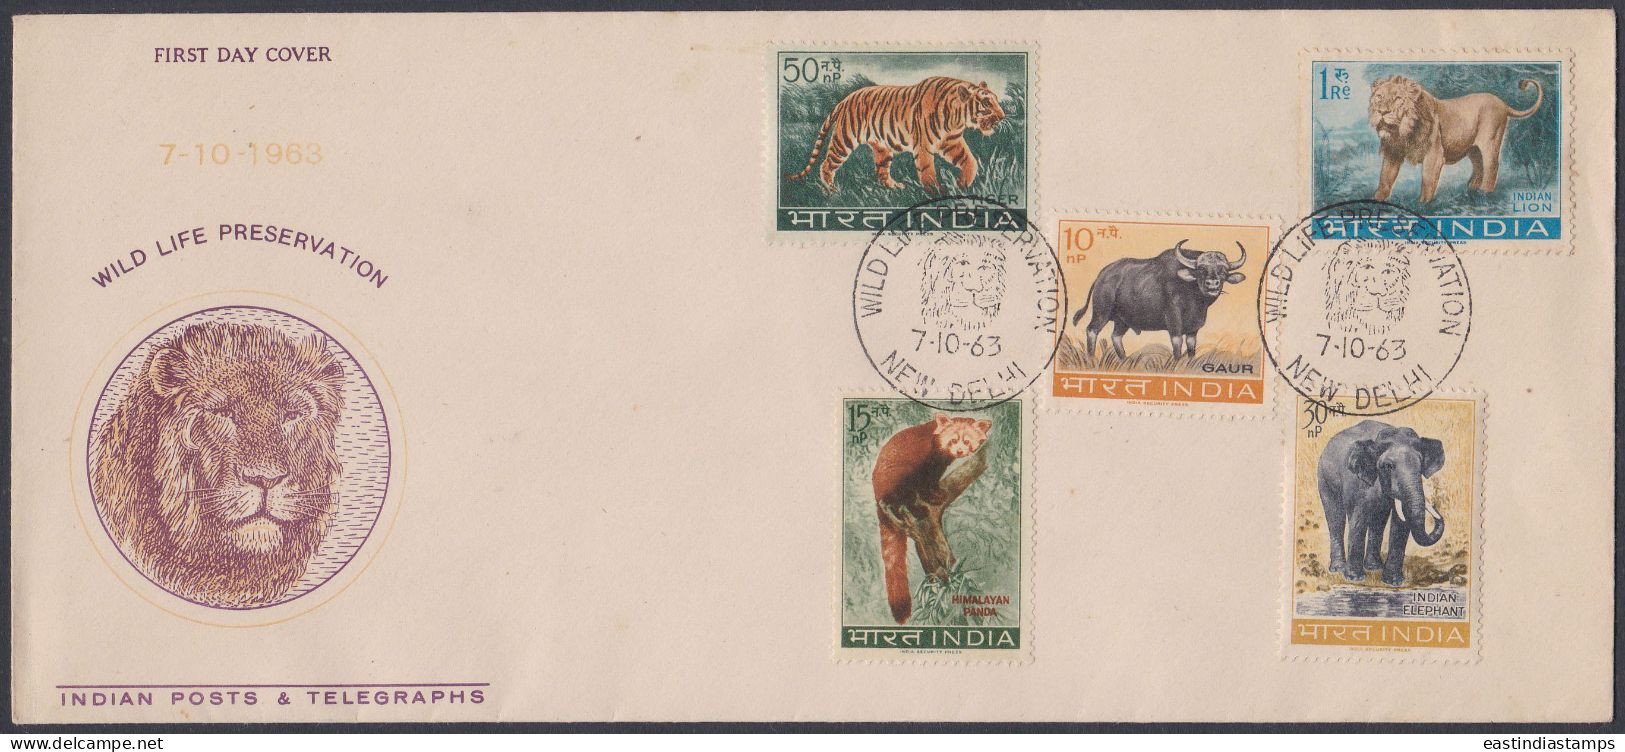 Inde India 1963 FDC Wildlife, Tiger, Himalayan Panda, Gaur Buffalo, Lion, Elephant, Wild Life, Animal, First Day Cover - Covers & Documents